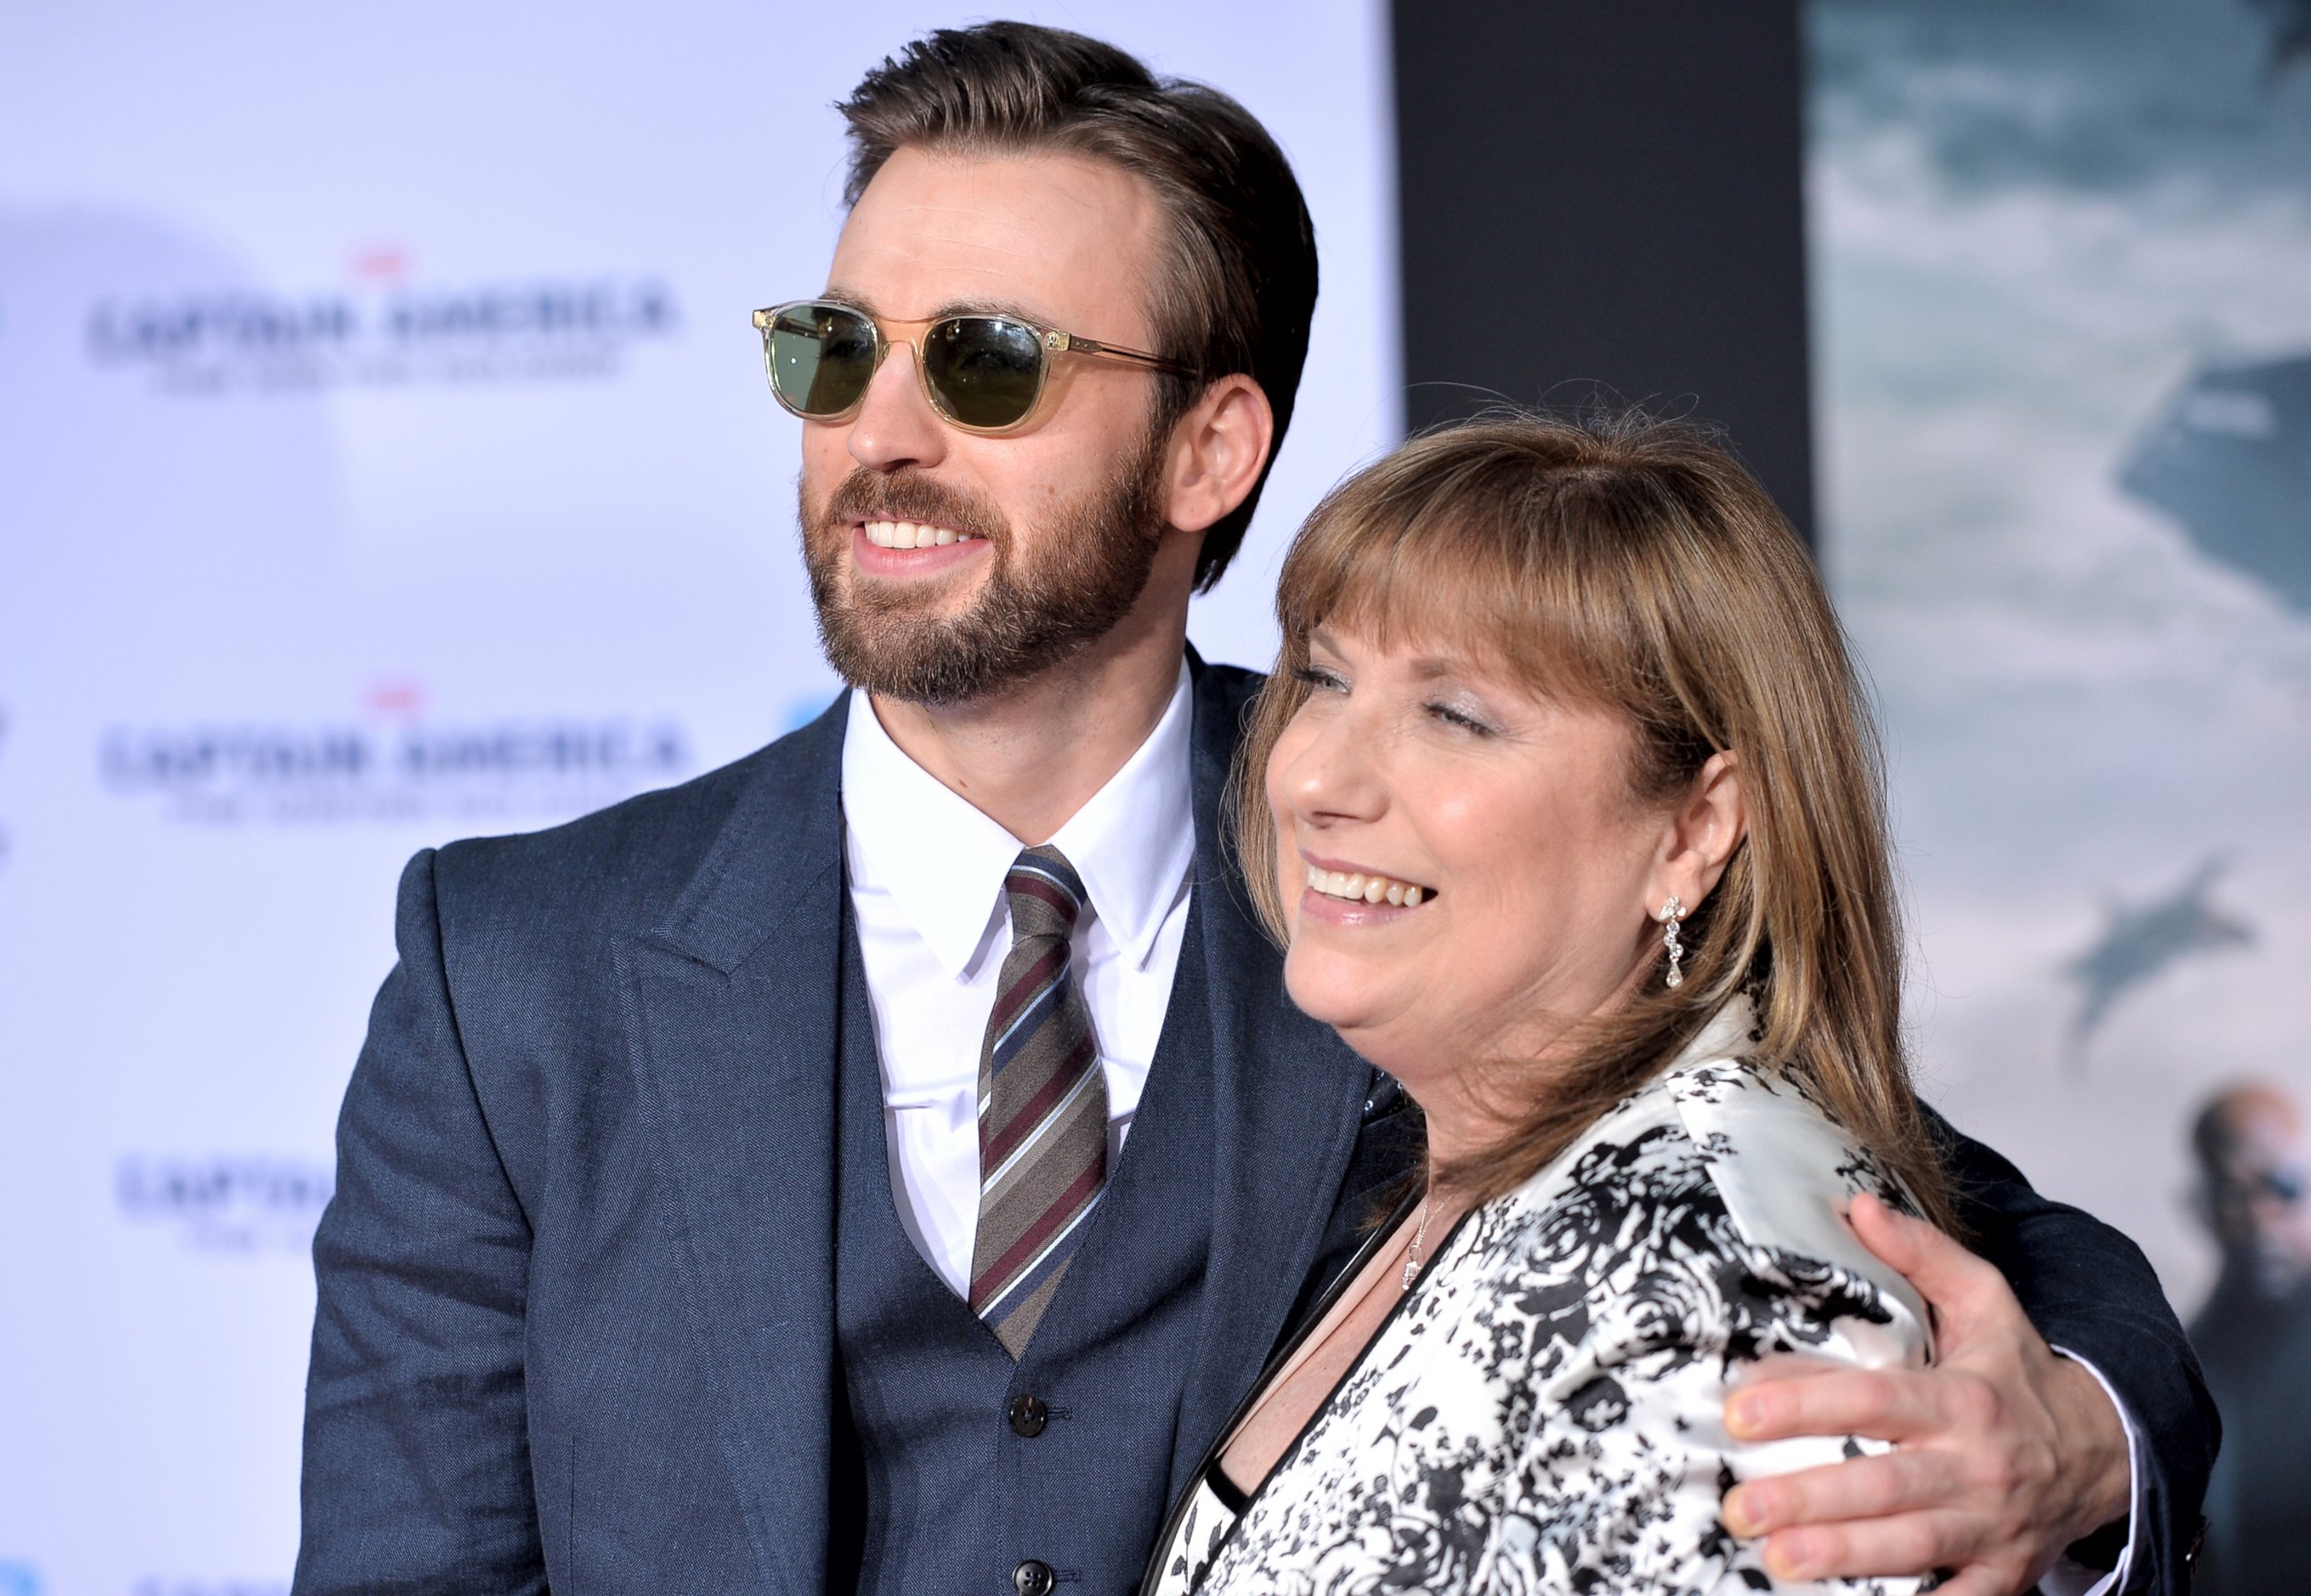 PHOTO: Chris Evans and Lisa Evans attend Marvel's "Captain America: The Winter Soldier" premiere, March 13, 2014, in Hollywood, Calif. 